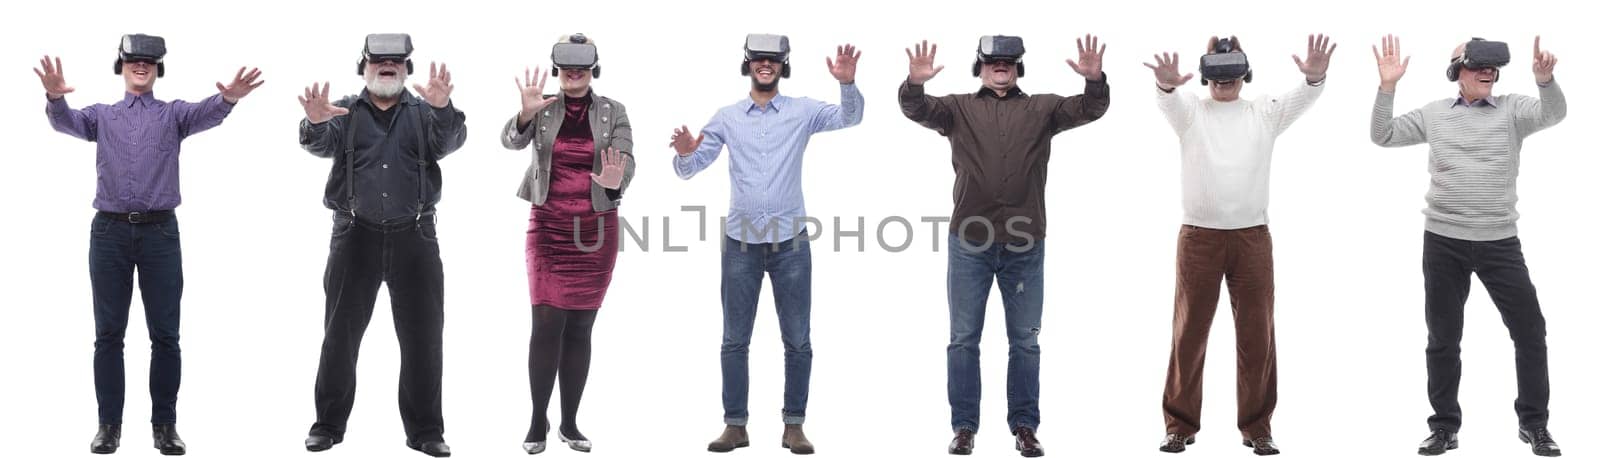 group of people with 3d glasses hands up isolated on white by asdf